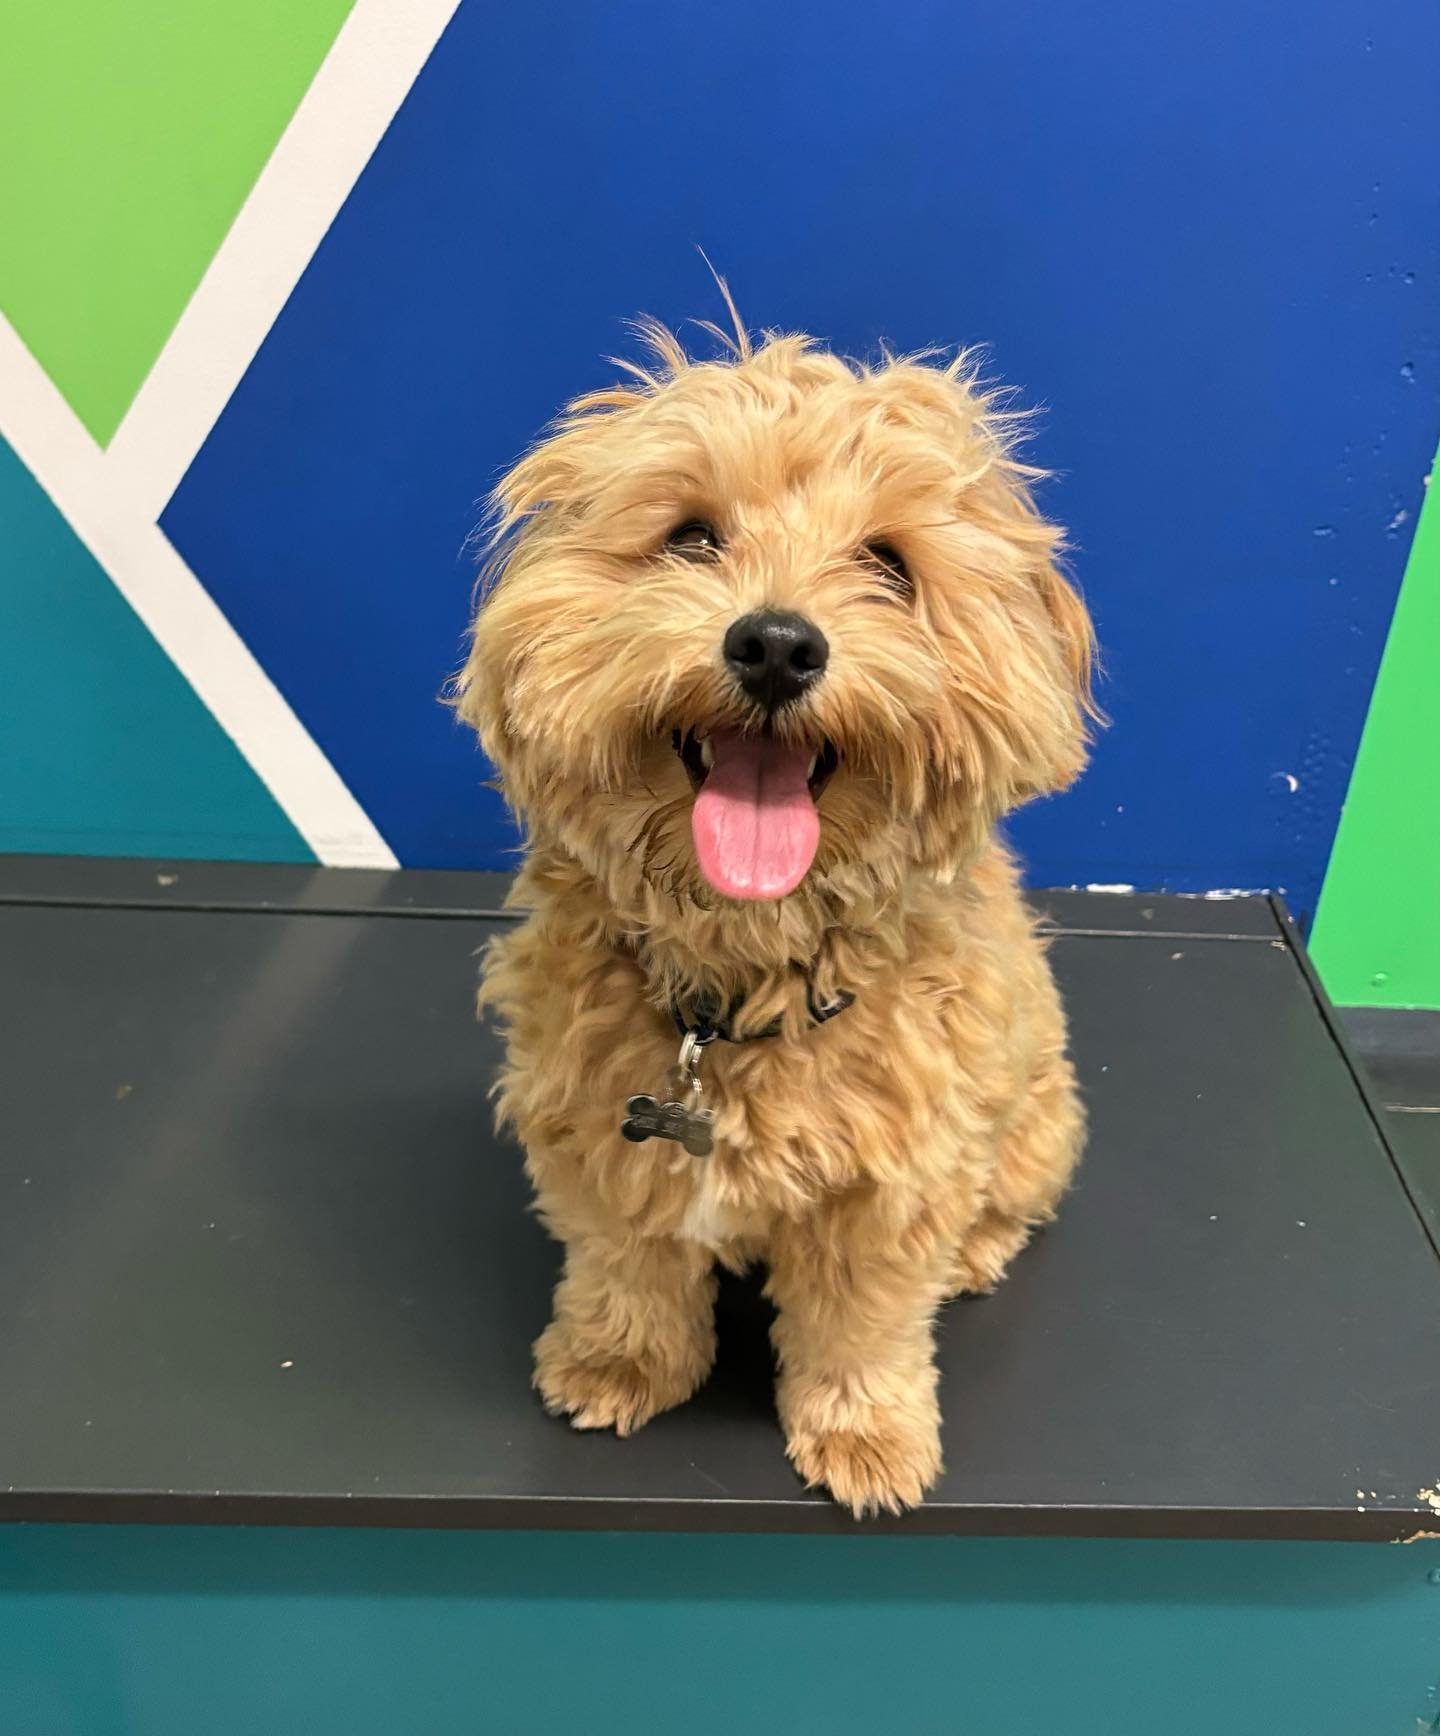 ✨I N T R O D U C I N G ✨

💚 CHESTER 💚

Chester is a gorgeous little moodle puppy that recently joined our Wednesday group! Chester has grown more and more confident each week, making a bunch of great new friends. We look forward to watching you gro